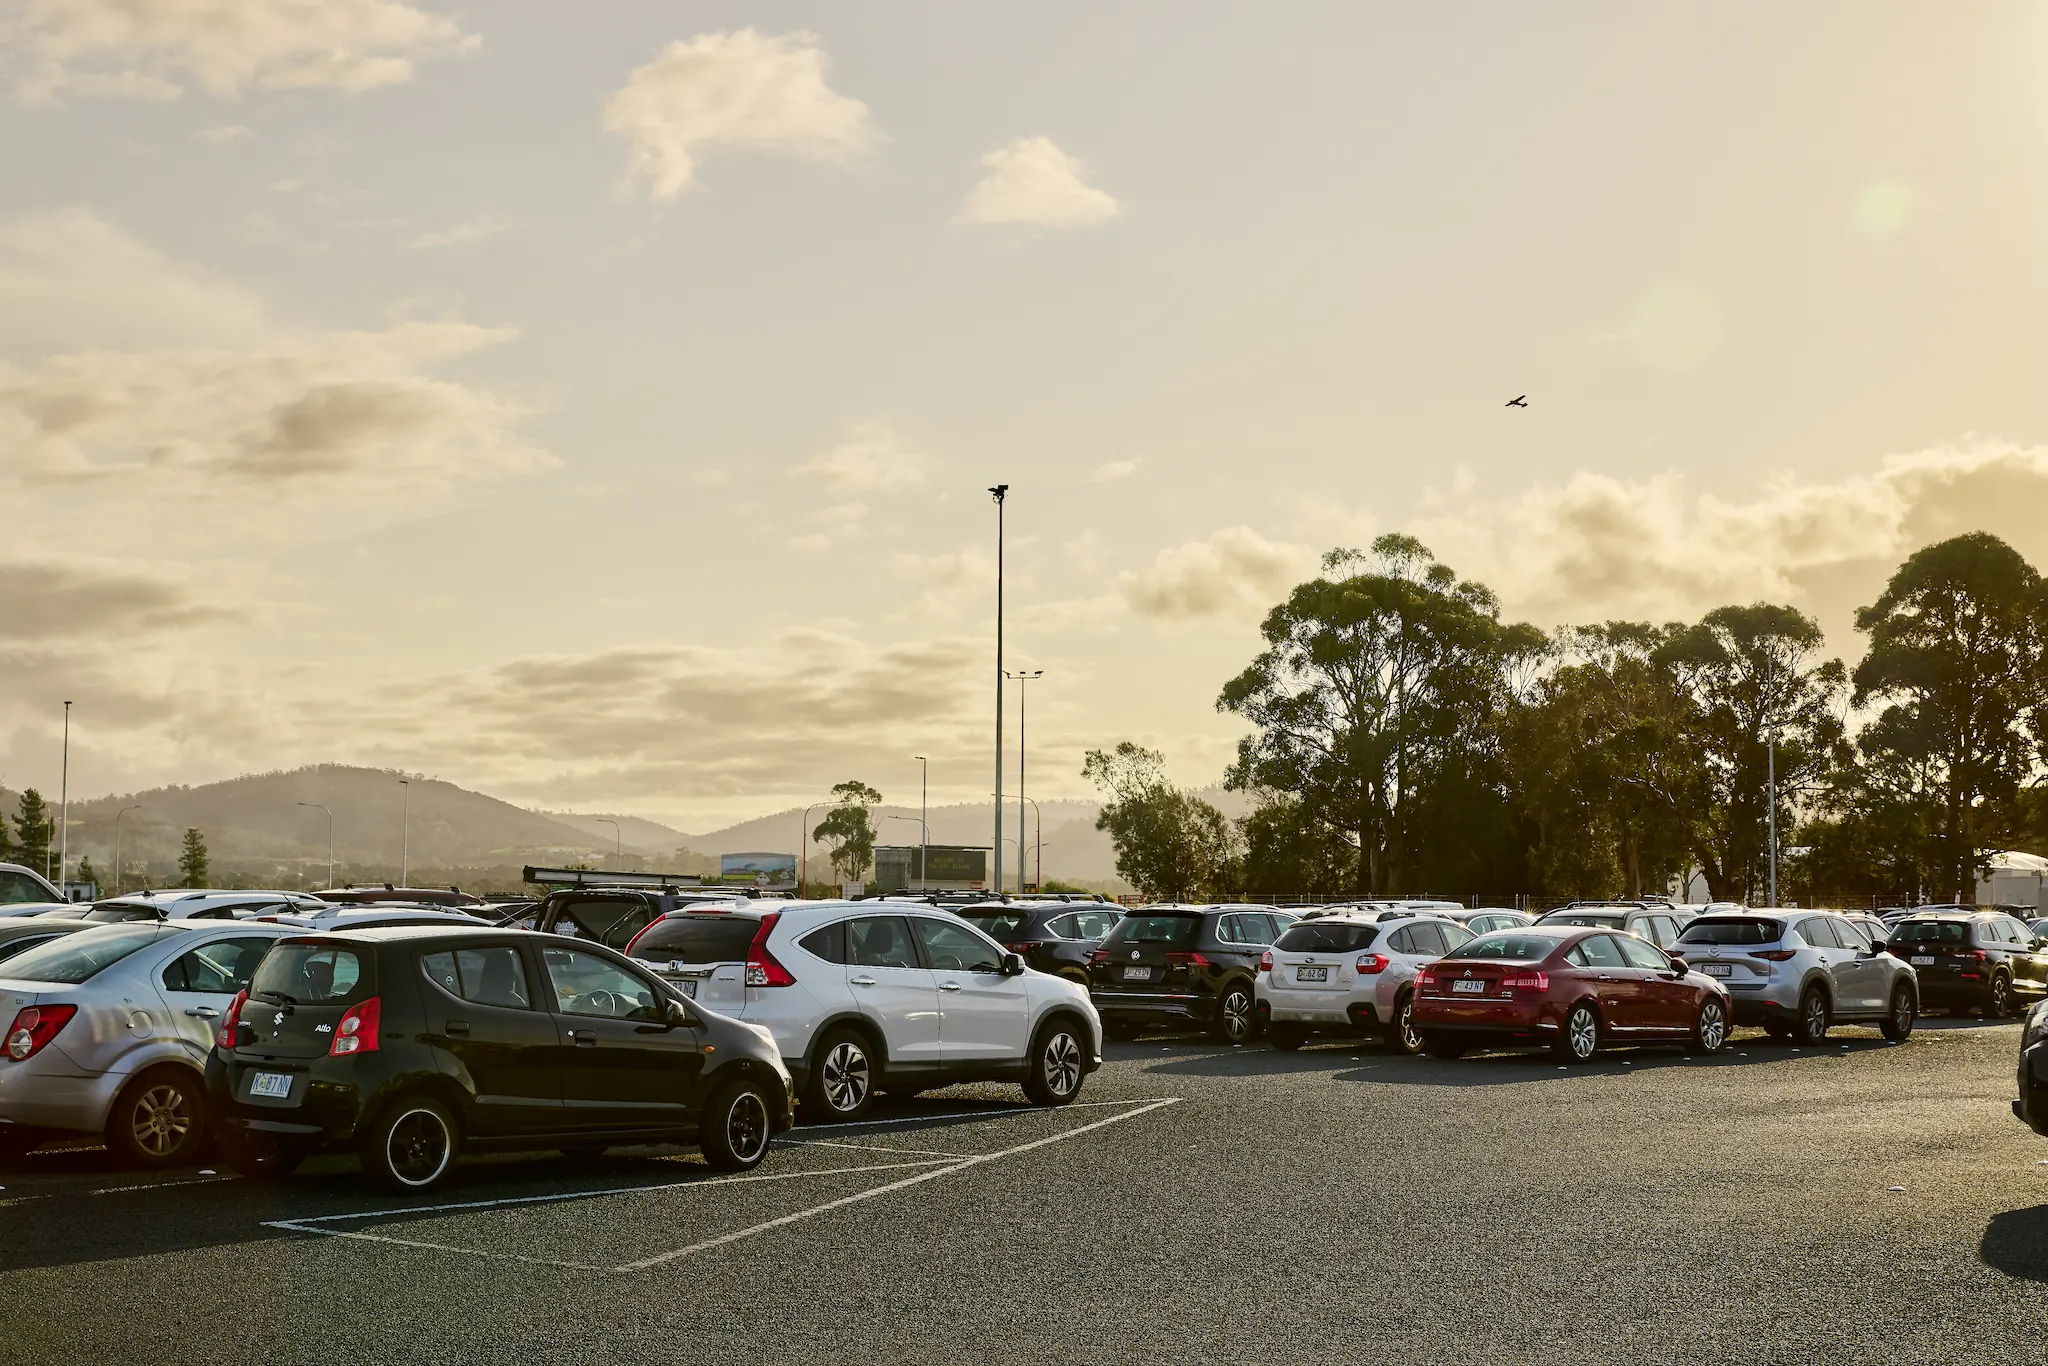 The sun casts shadows on the Hobart Airport long term carpark. A plane flies in the sky.